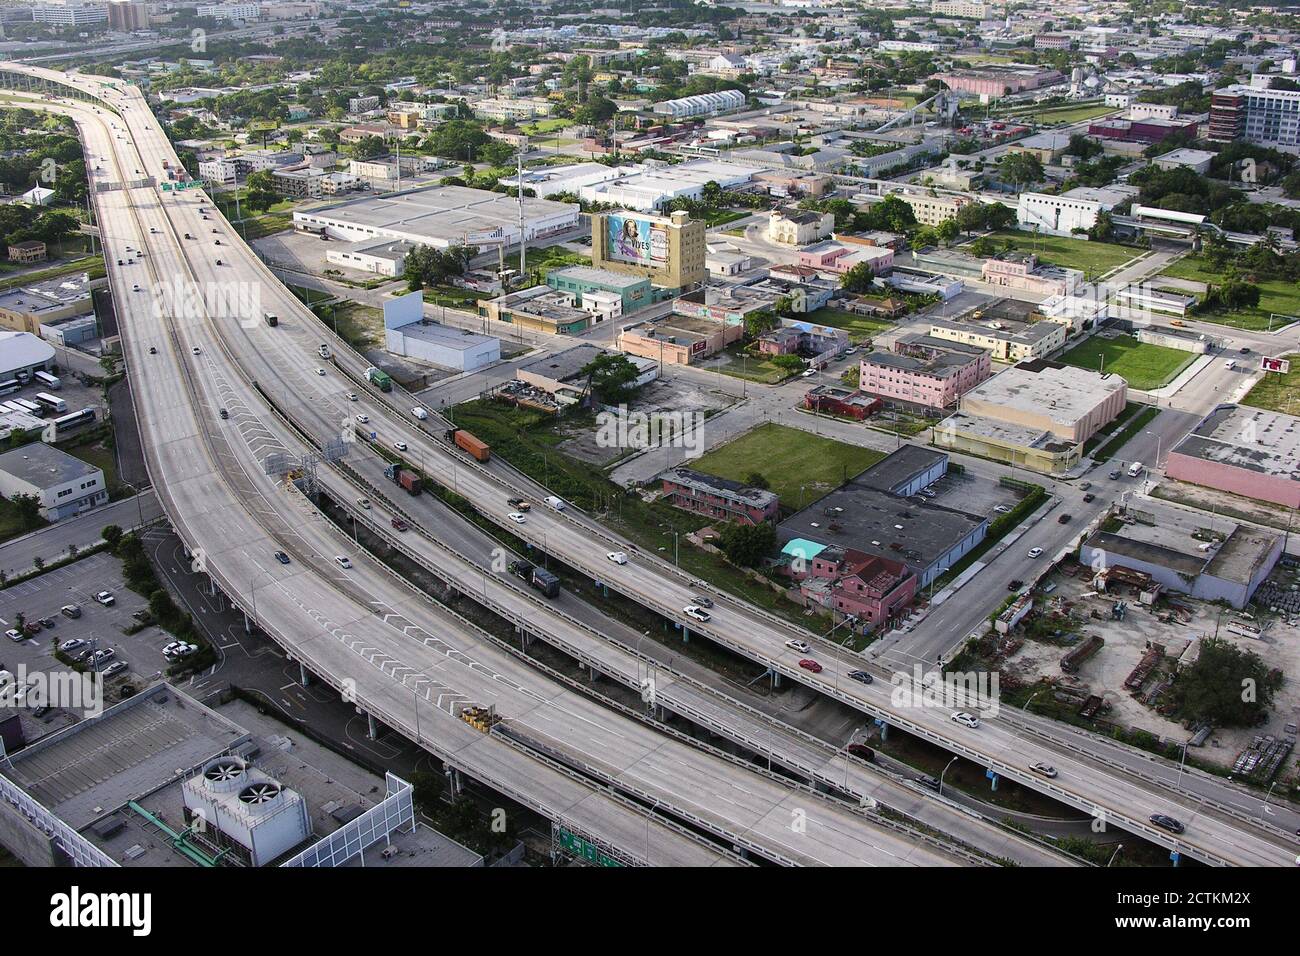 Archival September 2005 aerial view of Interstate 95 bridges and ramps in the Overtown area of Miami, Florida, USA. Stock Photo